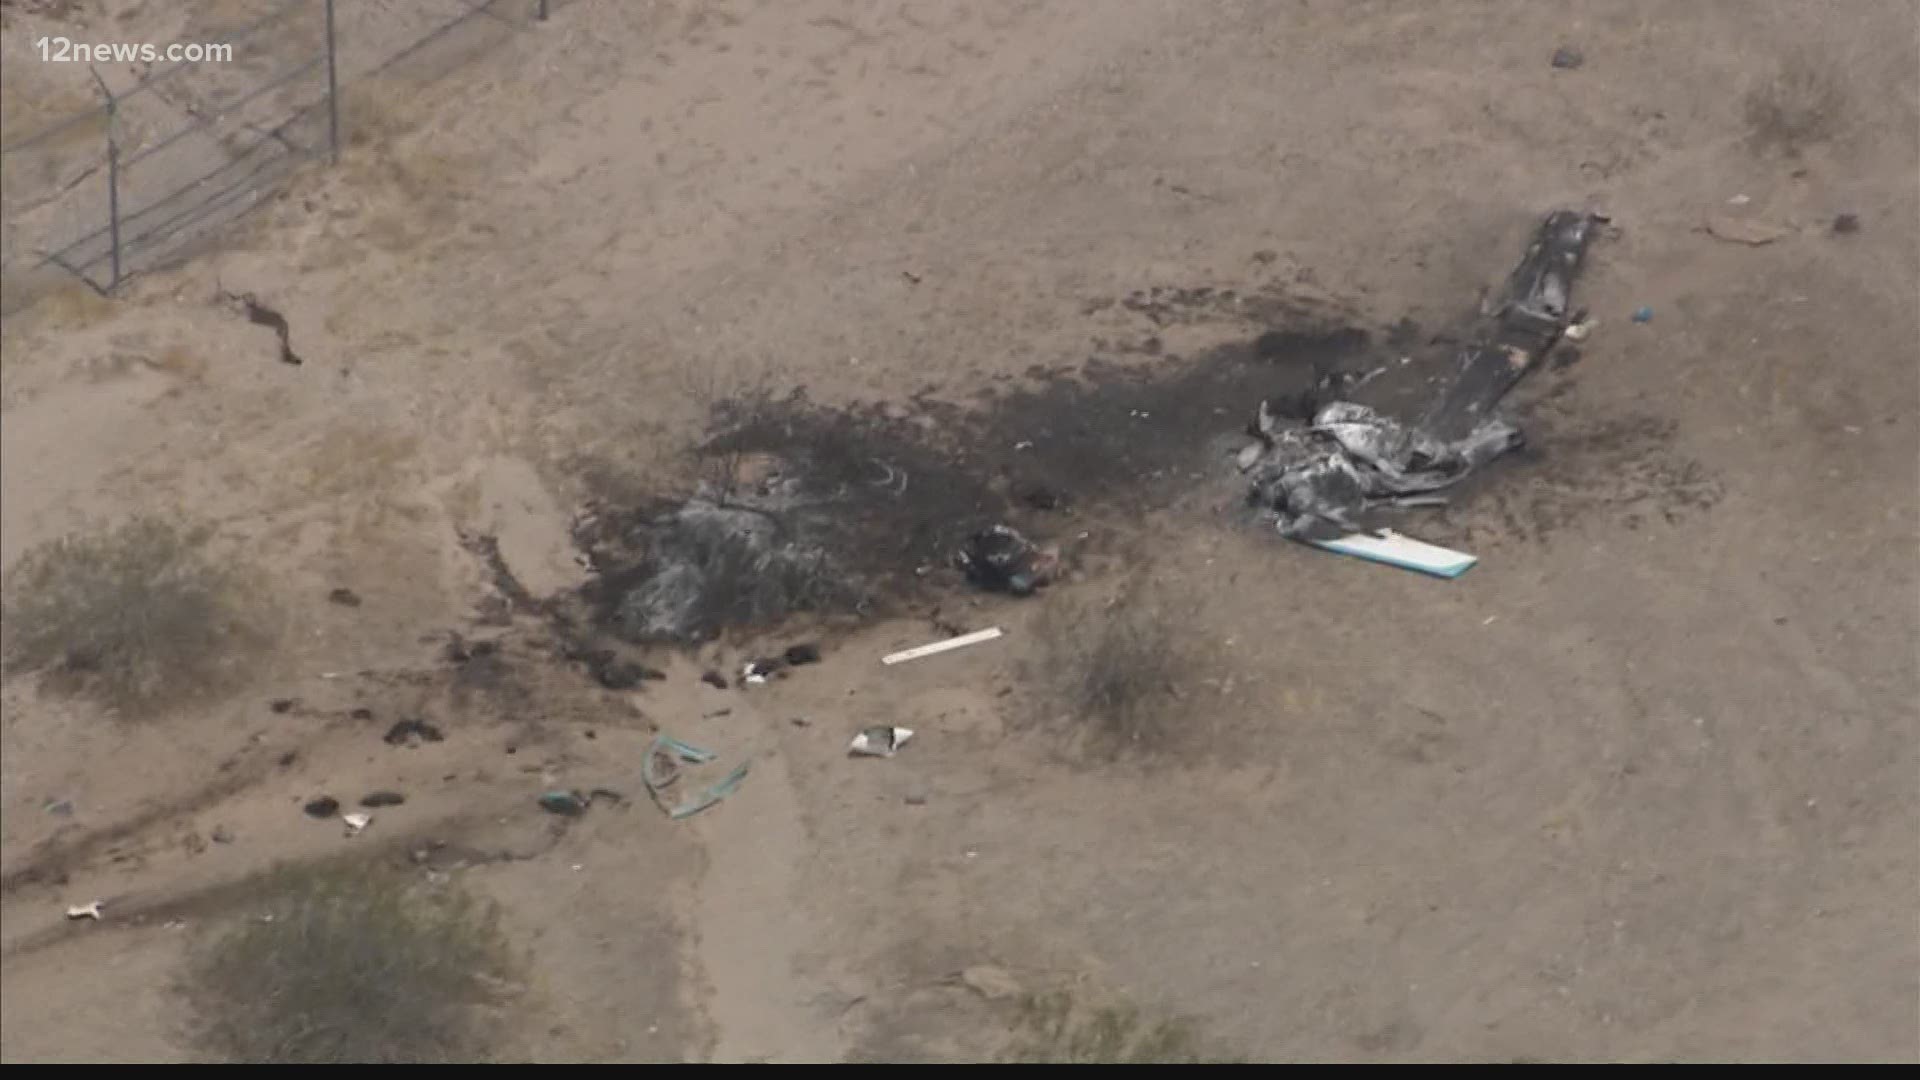 Authorities said one person is dead and another has critical injuries after a plane crashed near the runway at Gila Bend Municipal Airport on Tuesday morning.